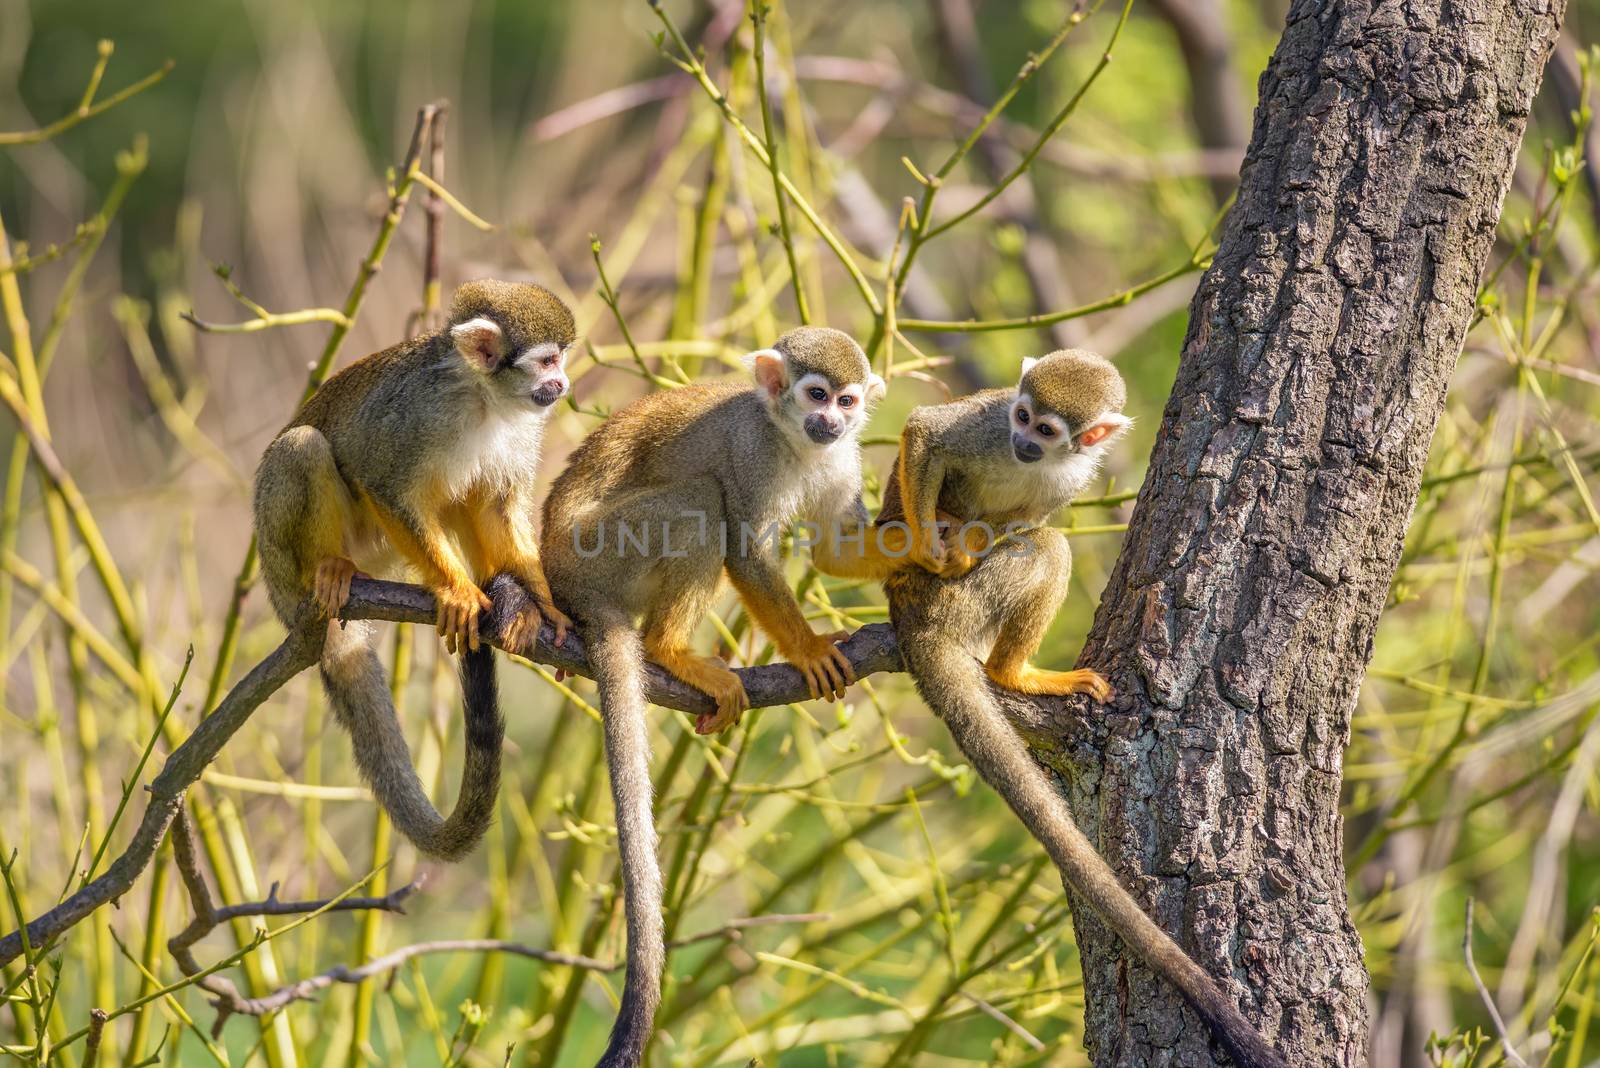 Three common squirrel monkeys playing on a tree branch